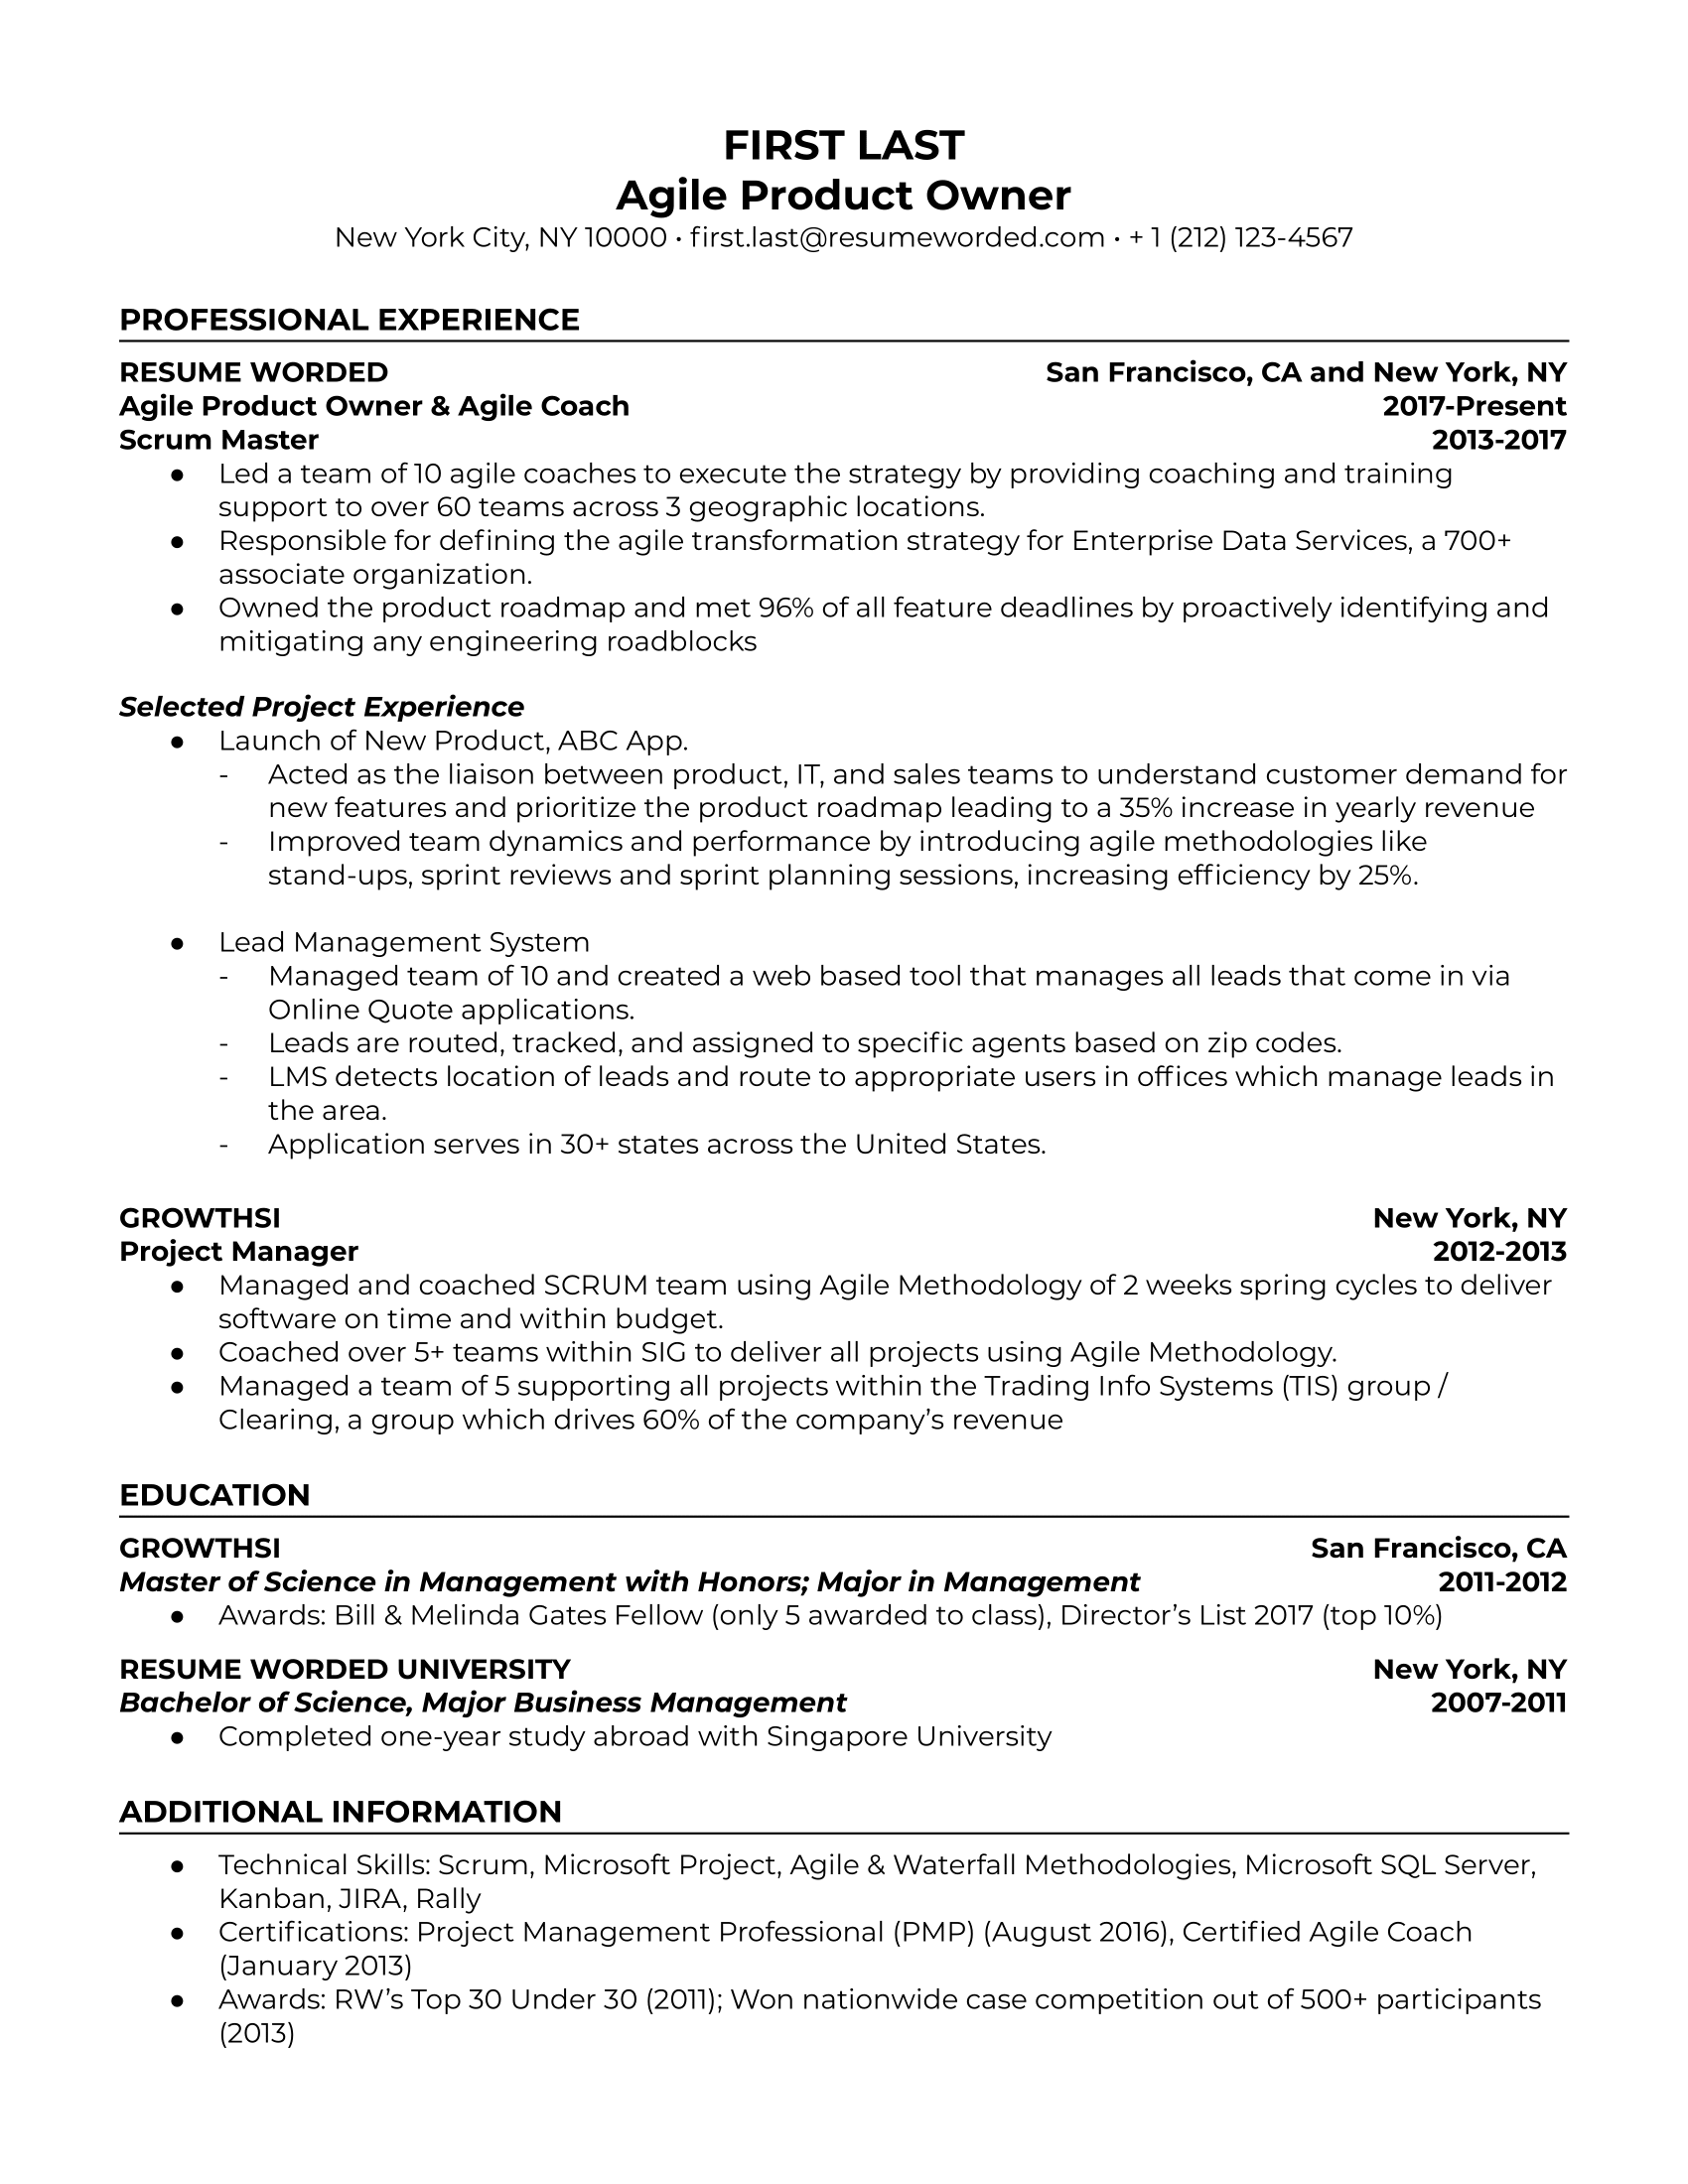 Agile Product Owner Resume Sample